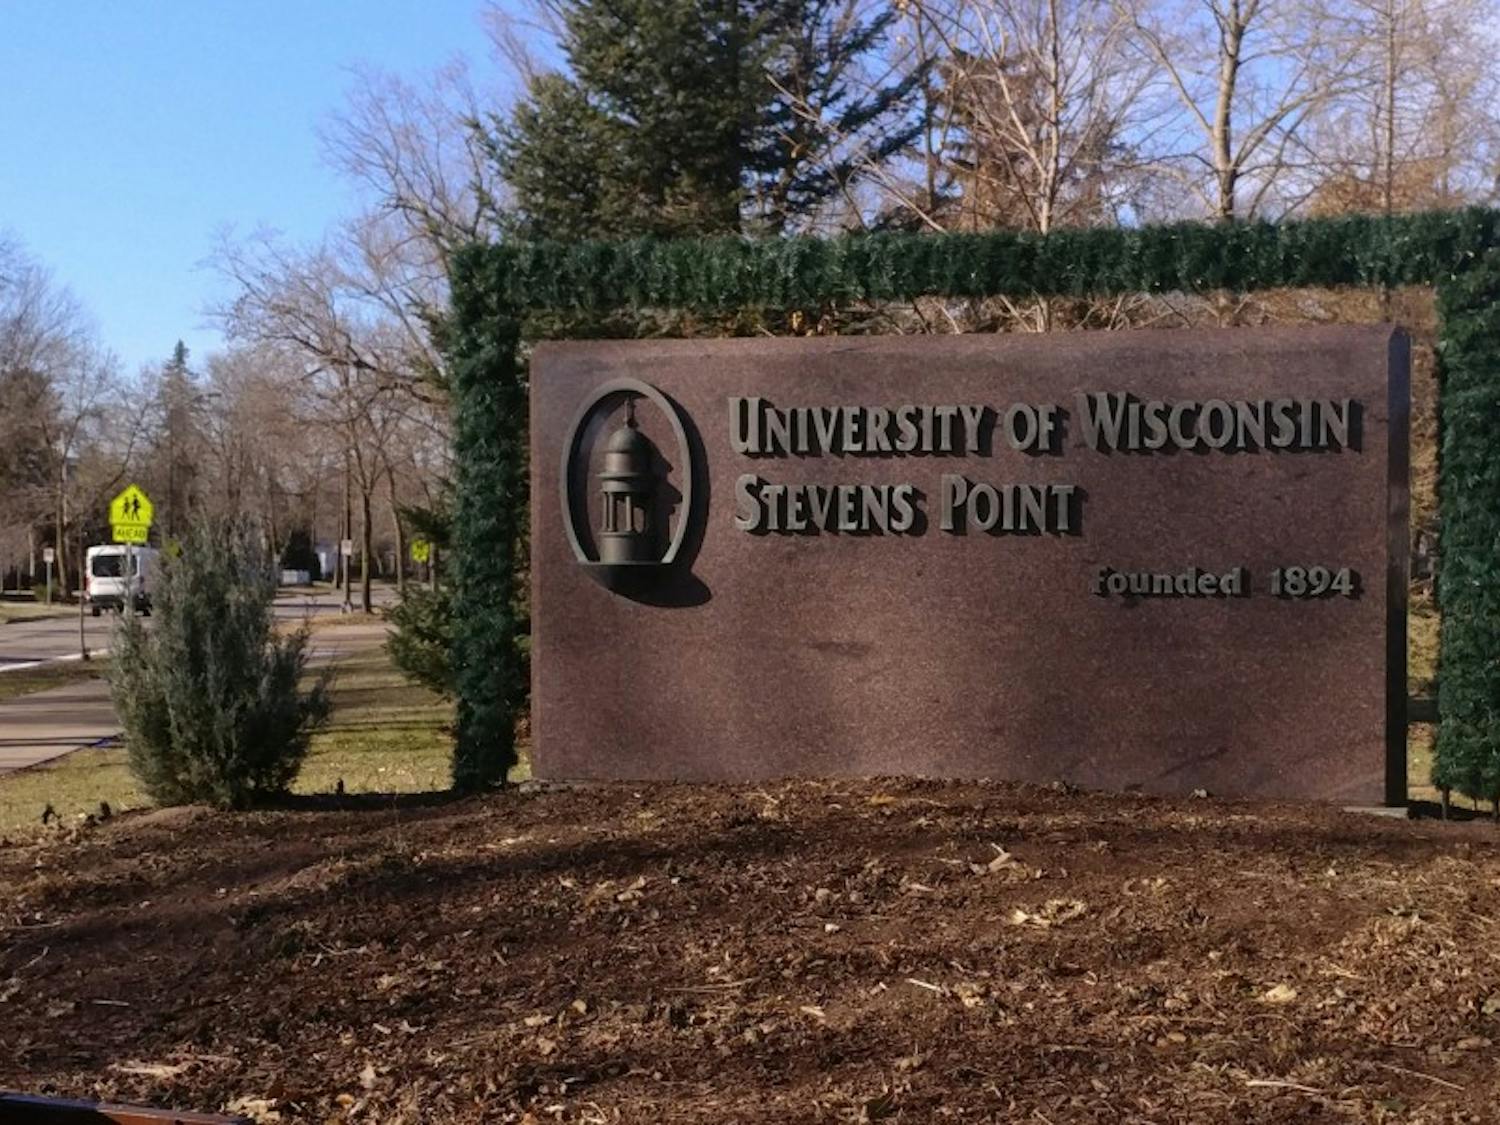 French, German, geography, geoscience, history and two art majors remain slated for elimination at UW-Stevens Point.